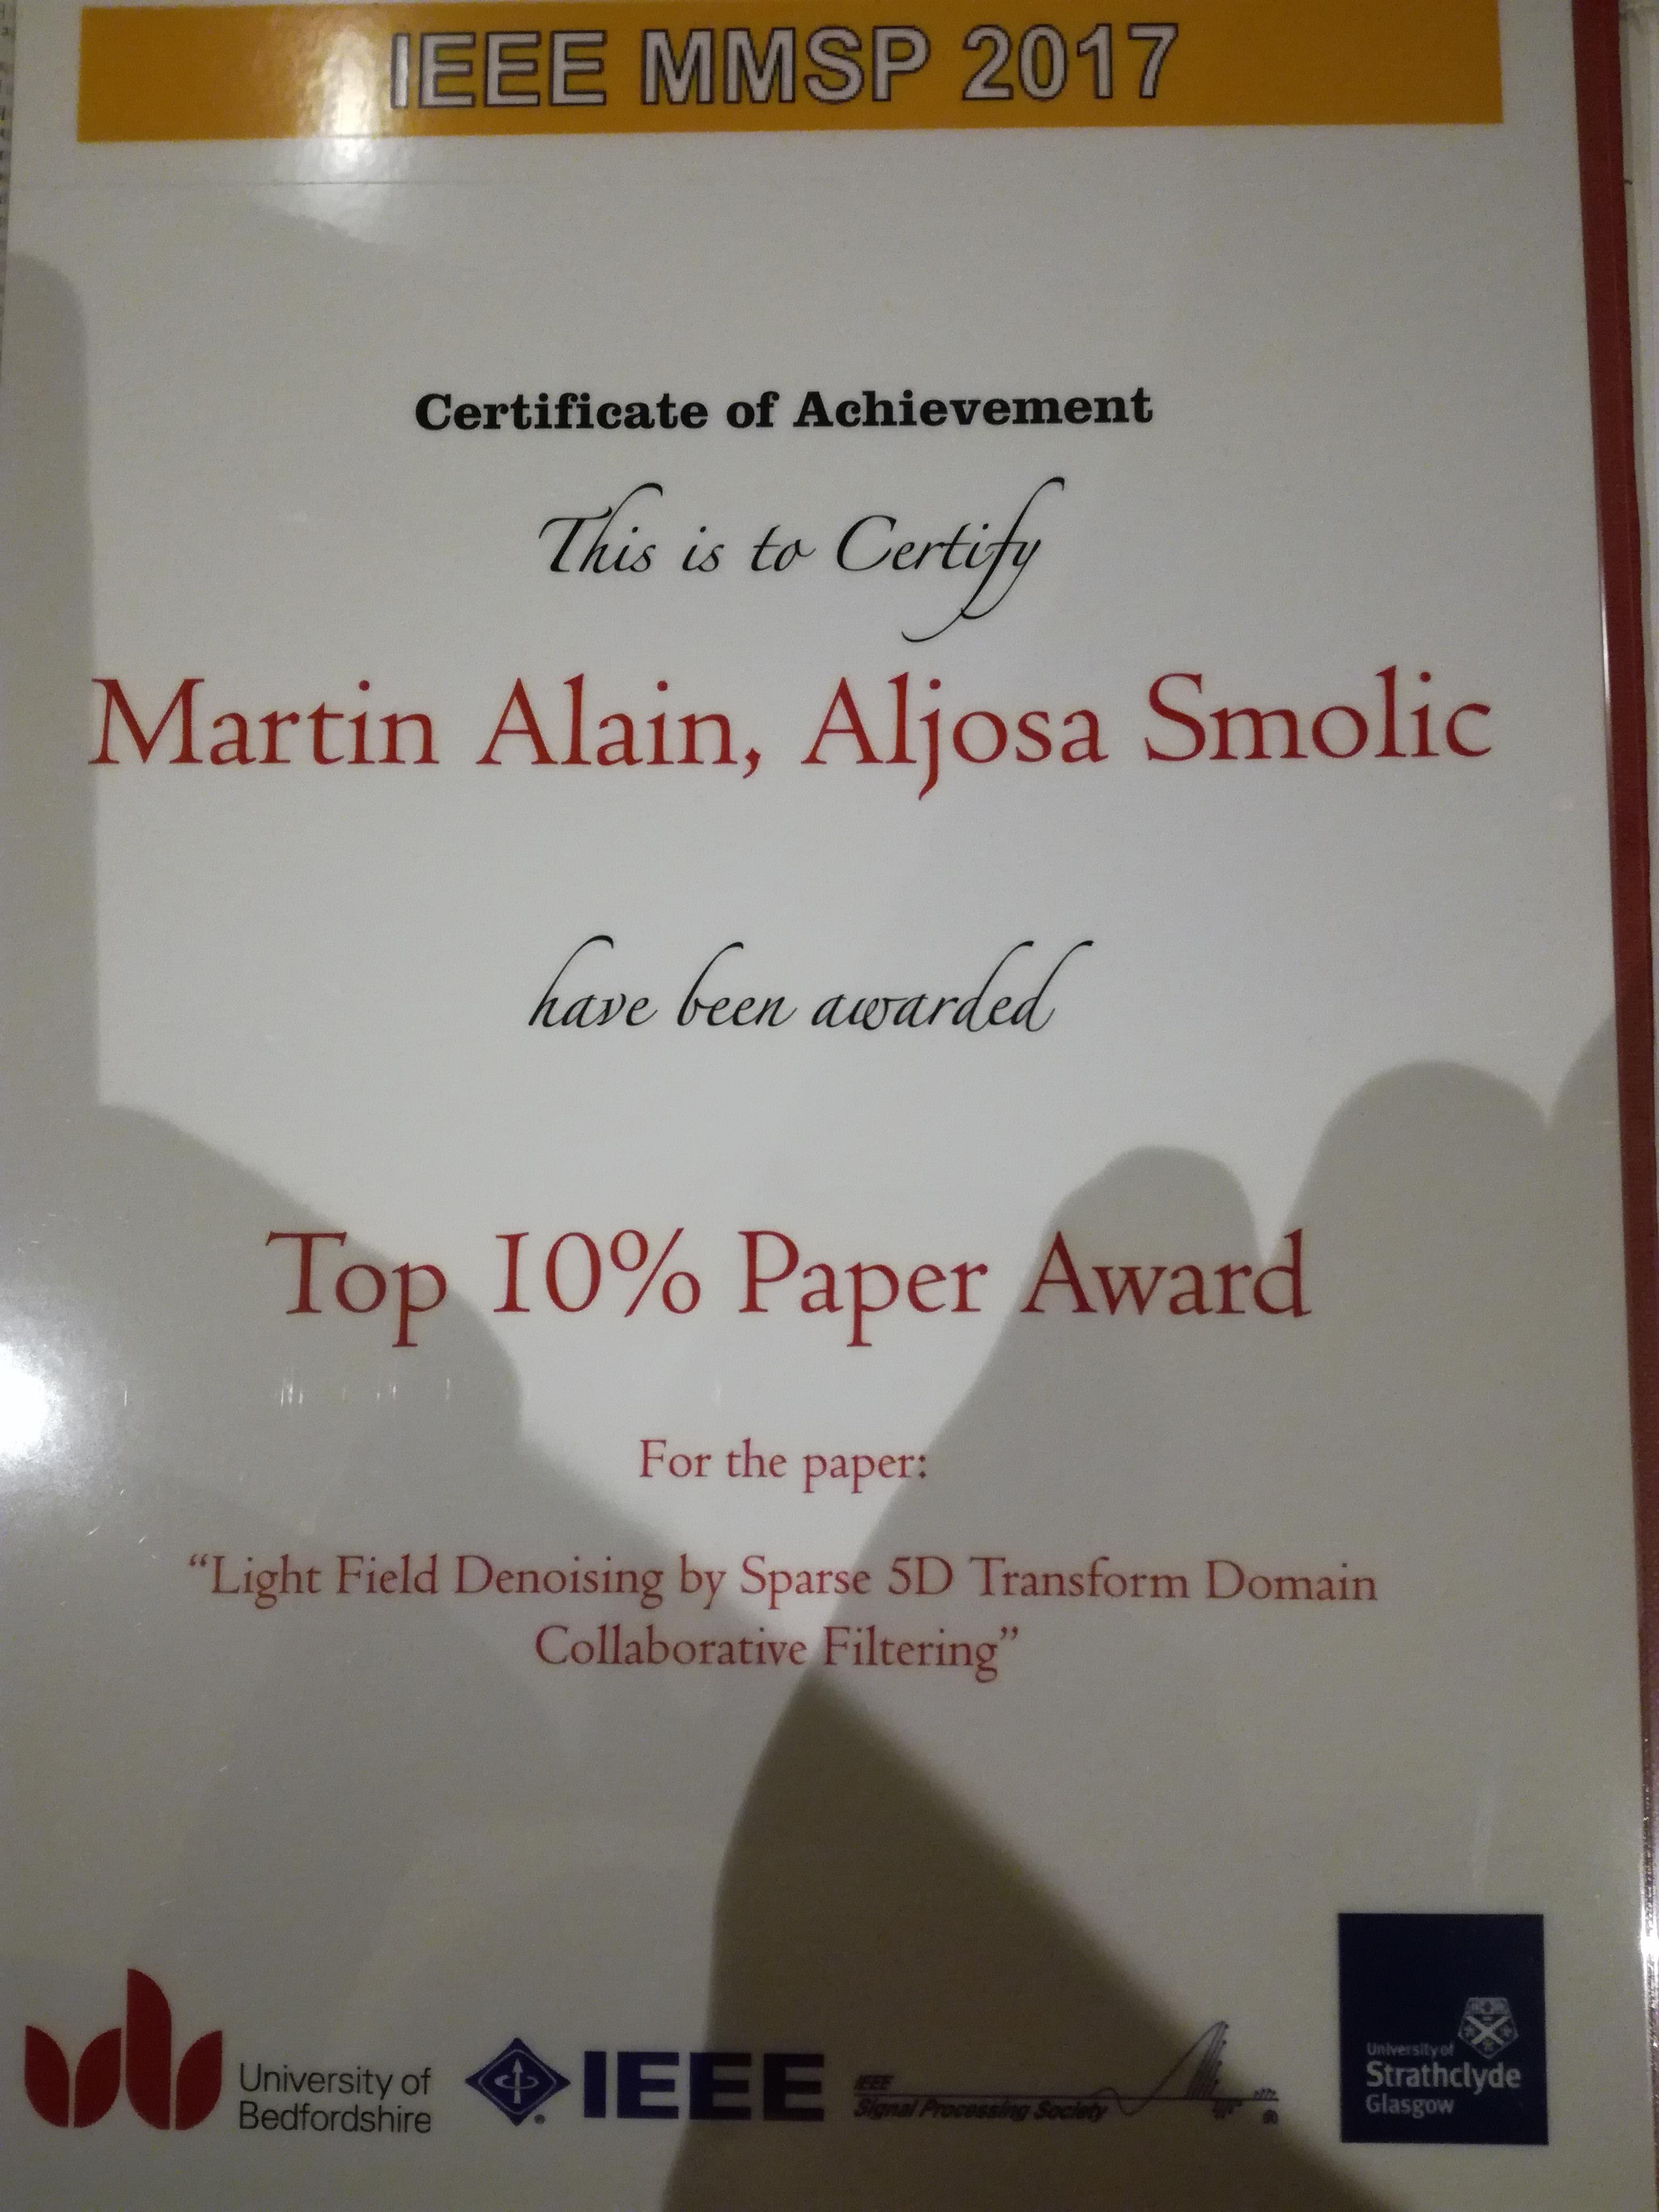 Congratulations to our colleague Martin Alain for receiving a Top 10% Paper Award at MMSP 2017 – IEEE 19th International Workshop!